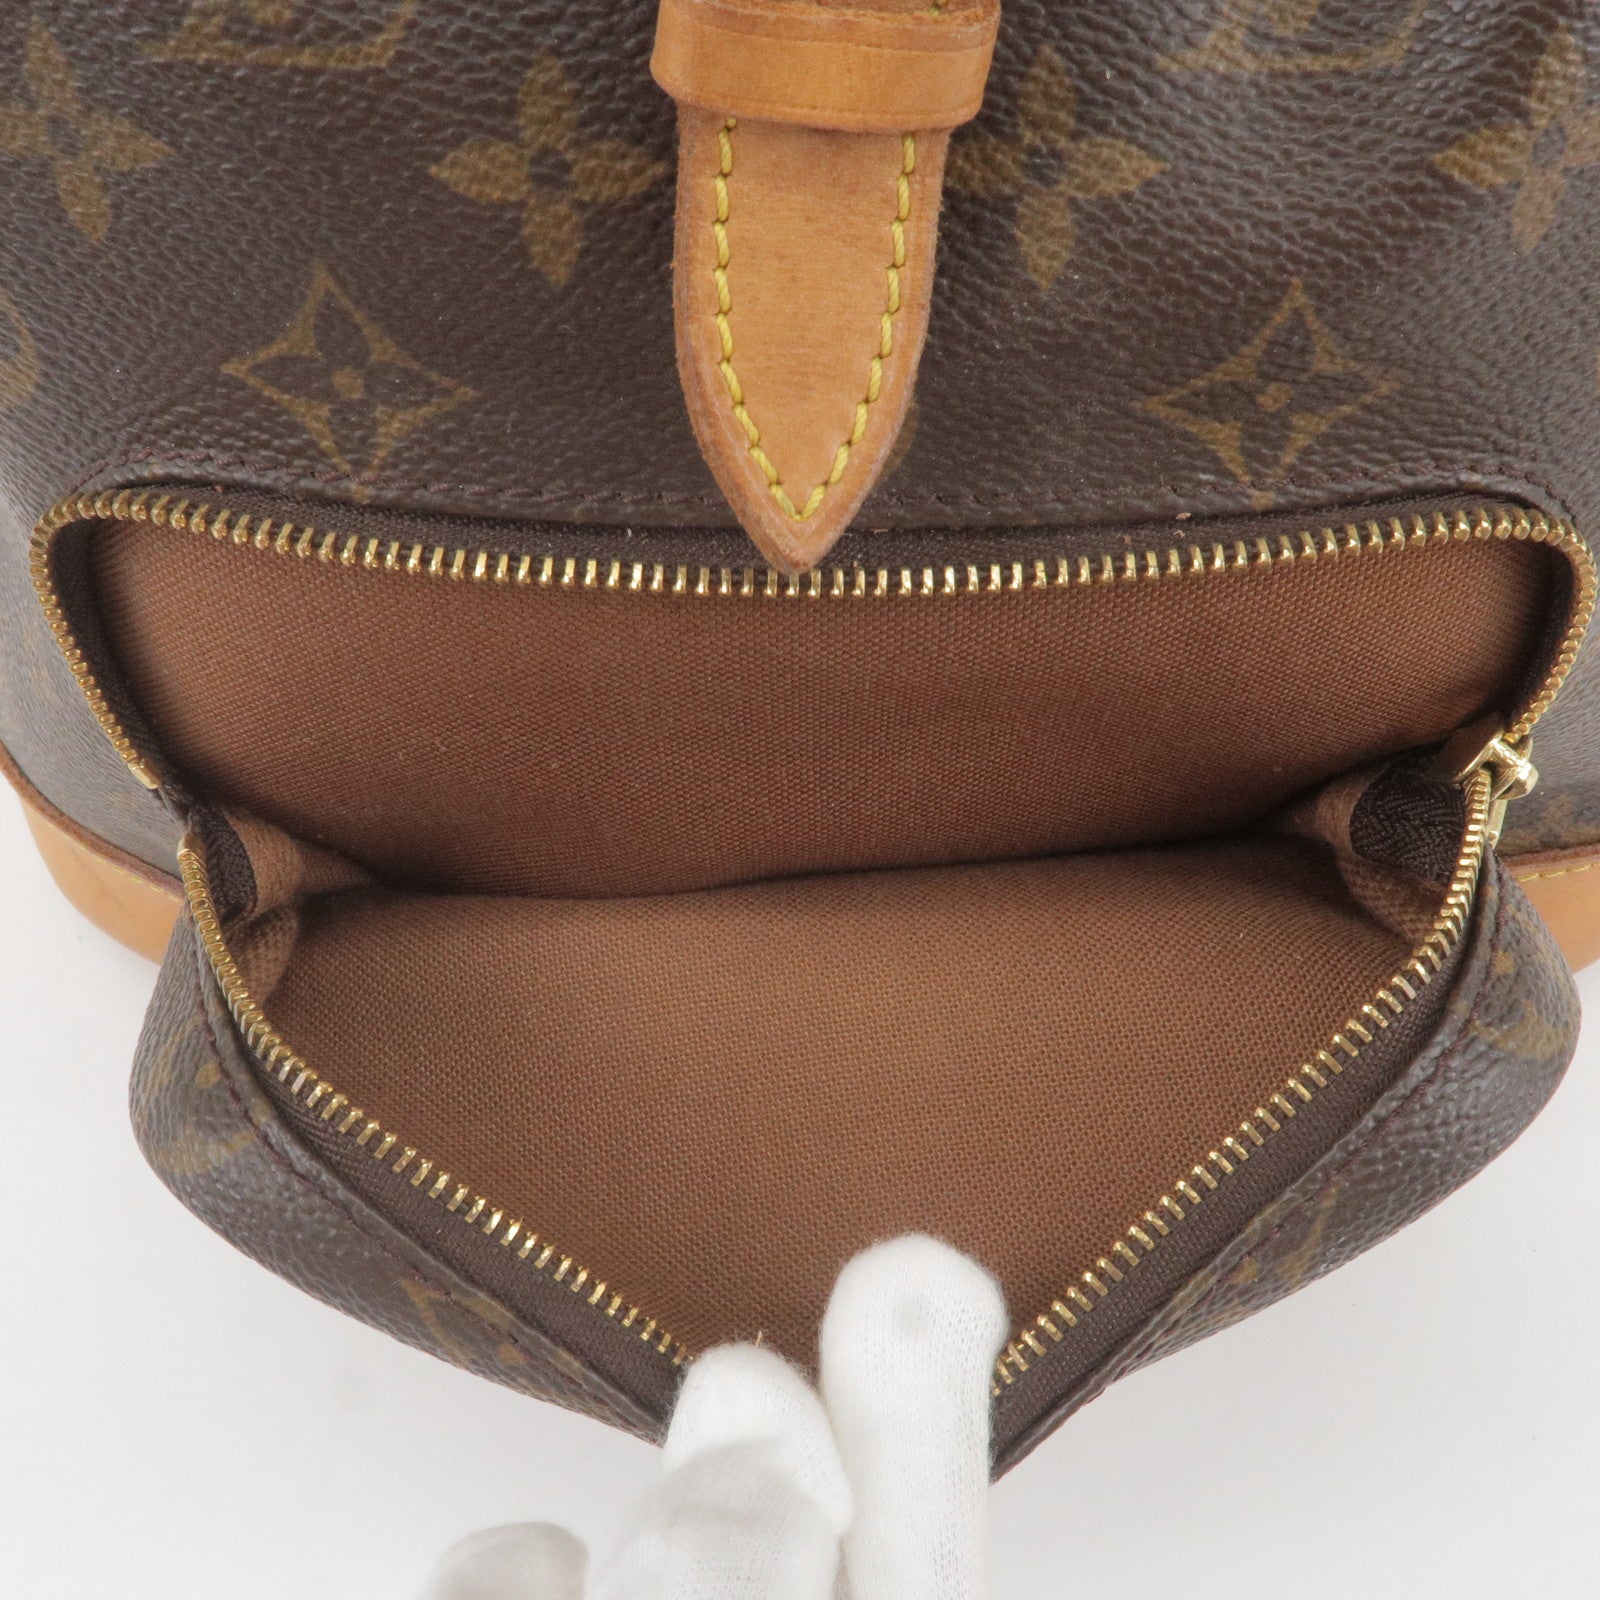 Lv speedy 30 With date code SP0016 Genuine leather No damage